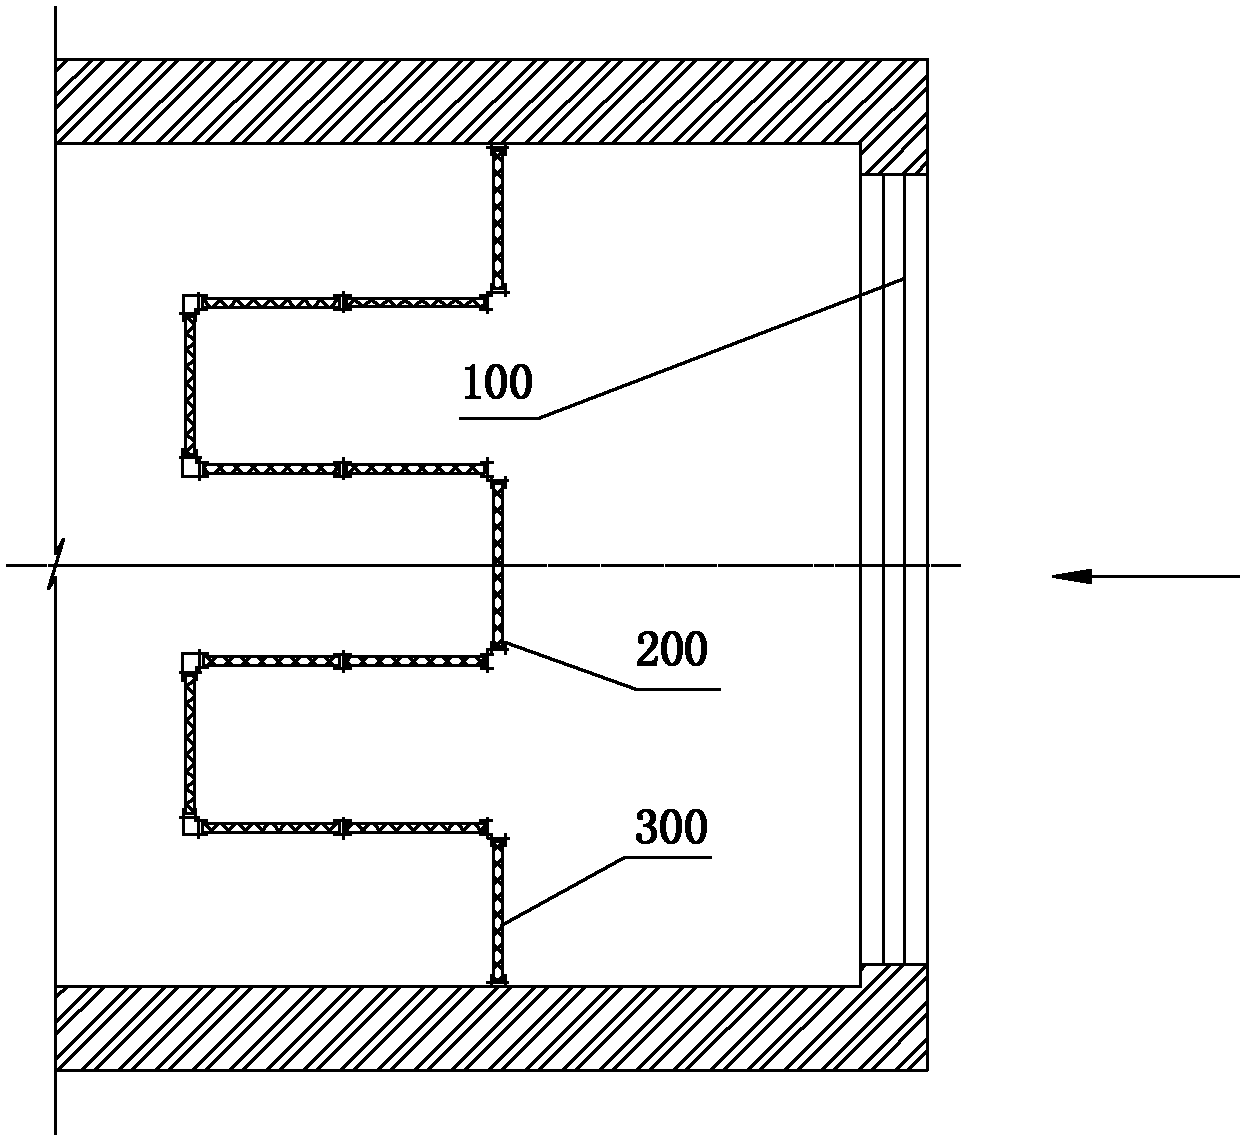 Air filtering device